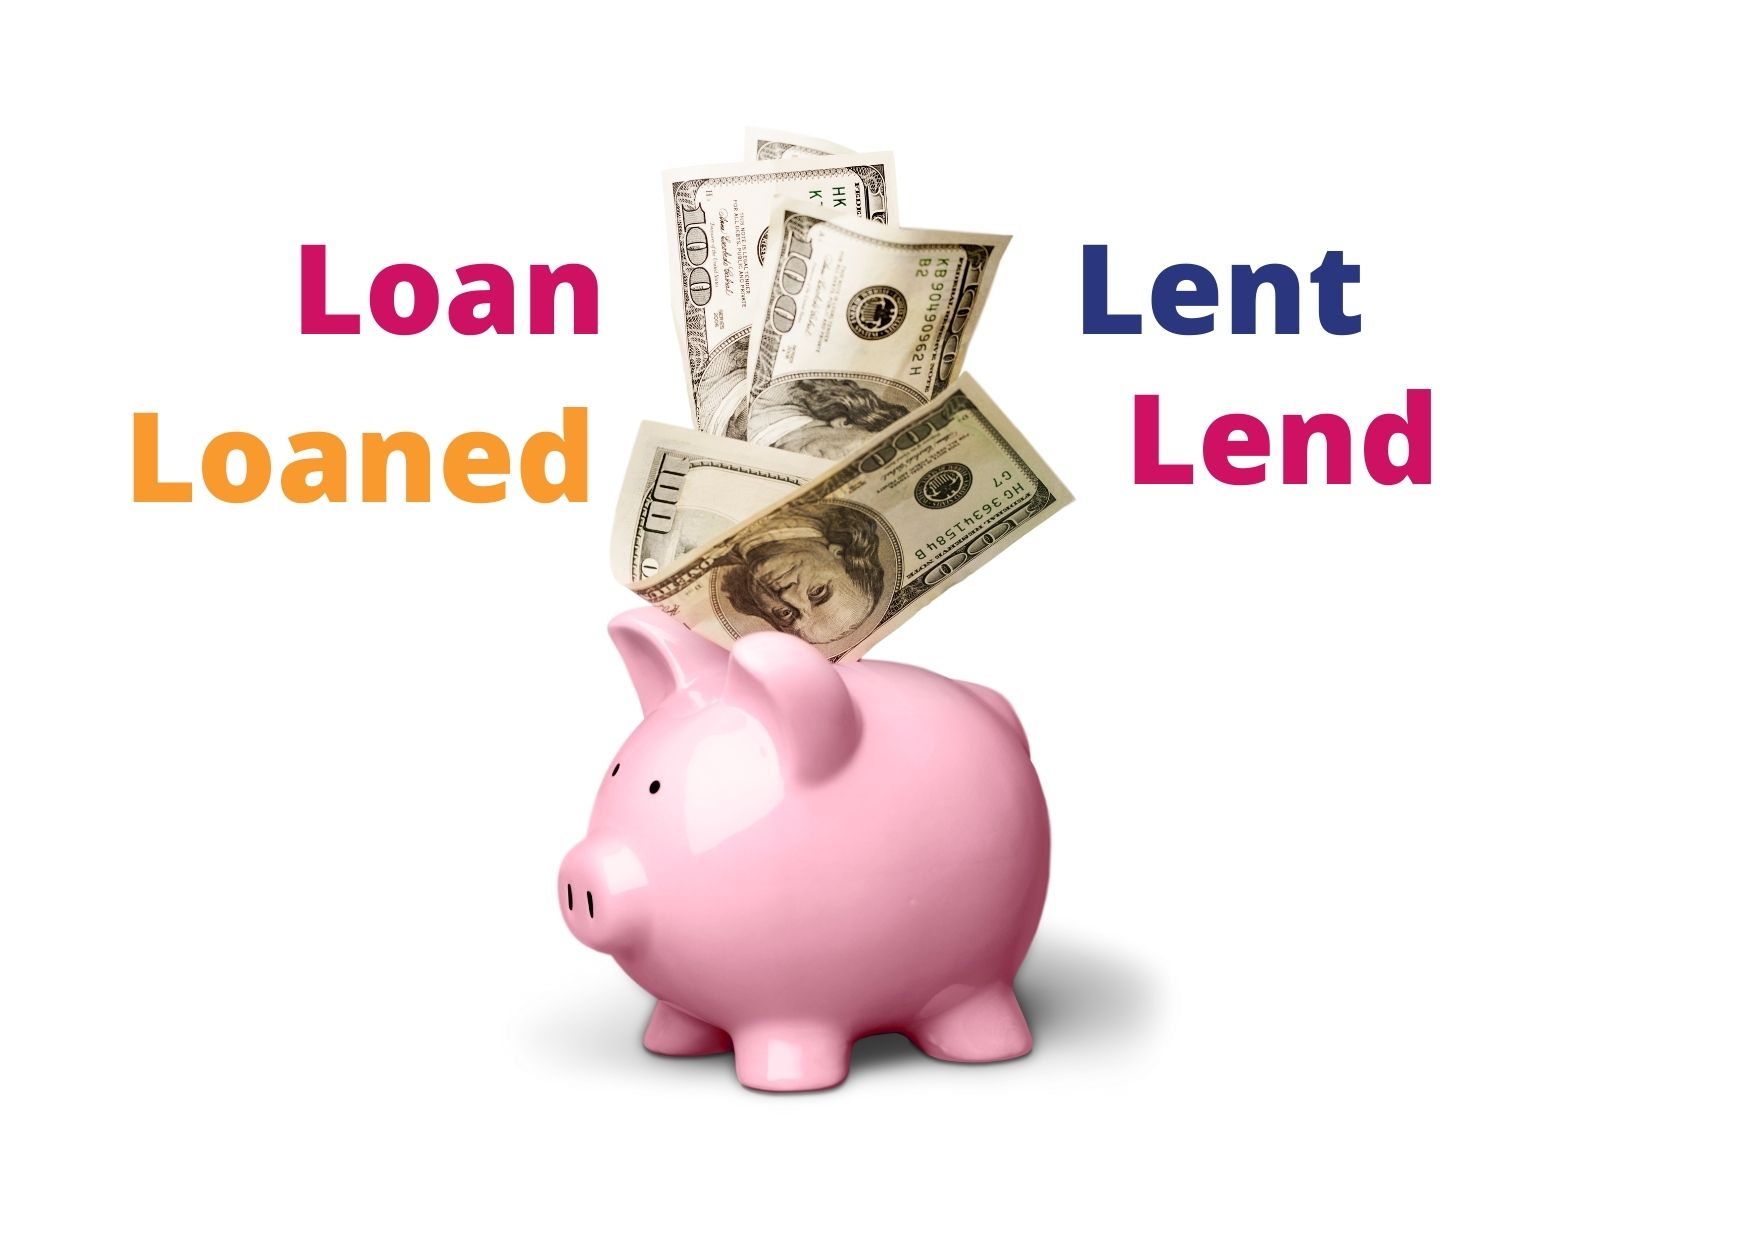 Graphic with a piggy bank and the words: "Loan, Loaned, Lent and Lend"